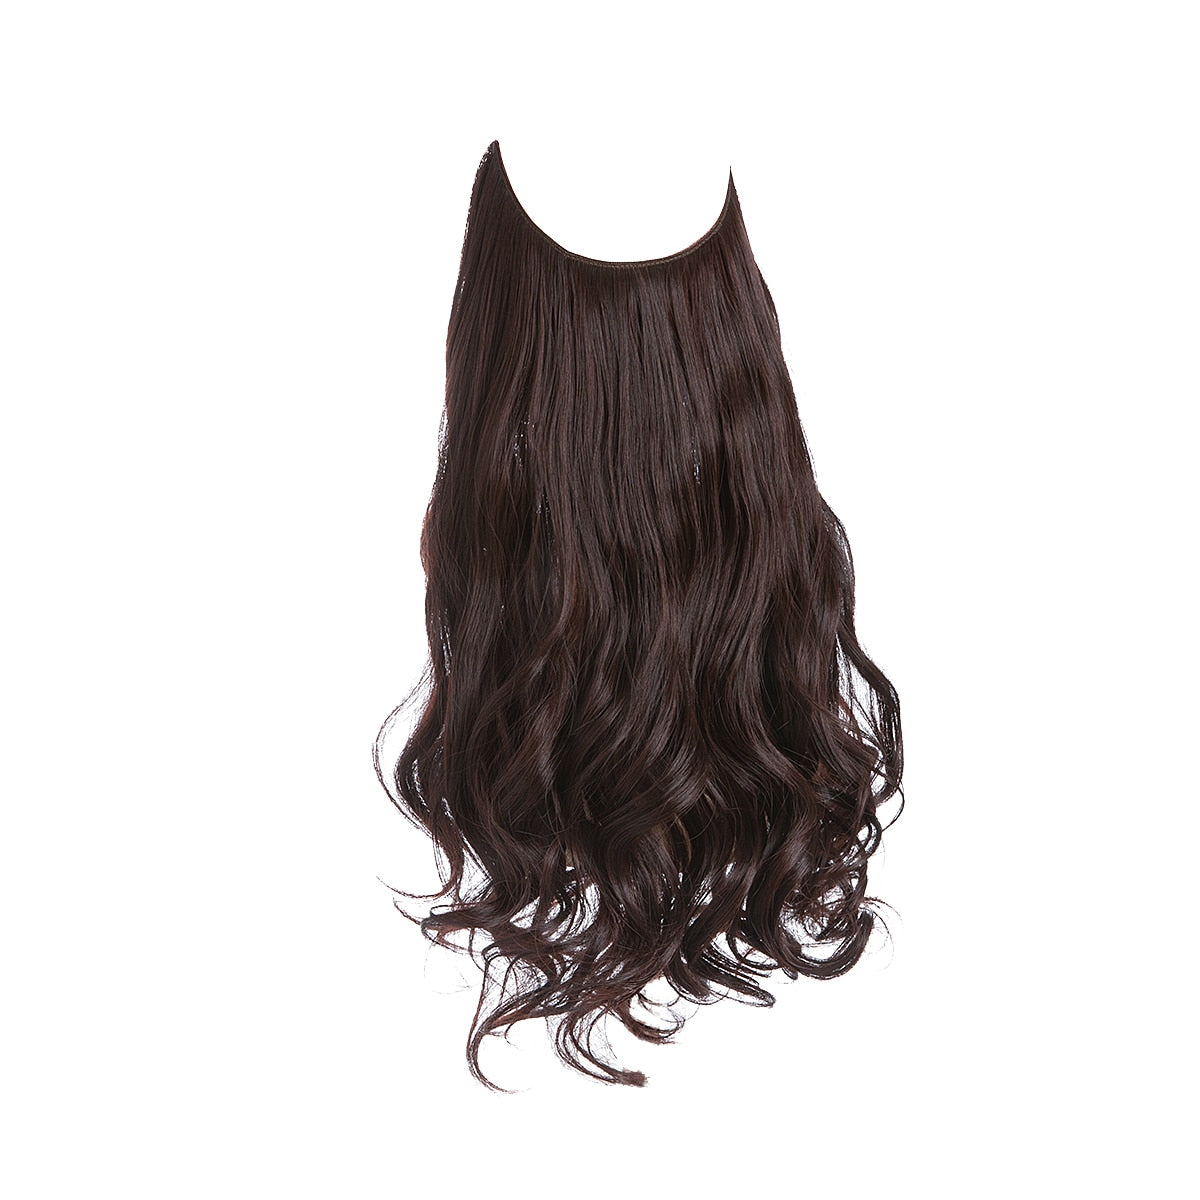 TEEK - Invisible Synth No Clip No Comb Wave Hair Extensions | Dark Varieties HAIR theteekdotcom Dark Chocolate 14inches 